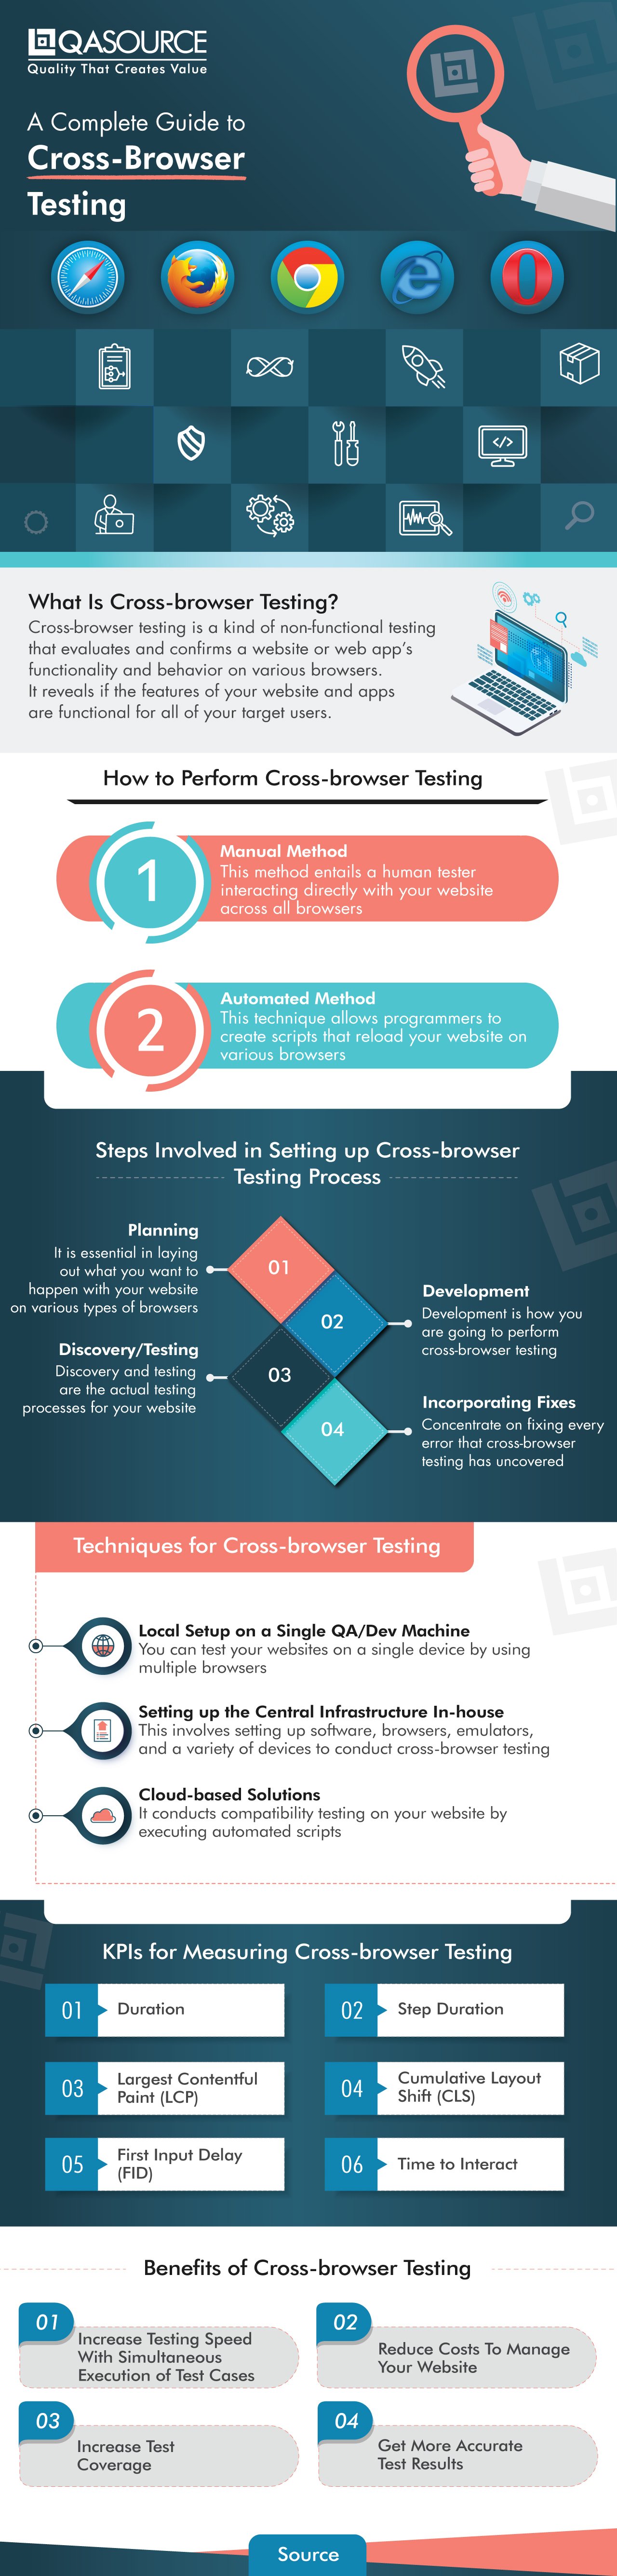 A Complete Guide To Cross-browser Testing